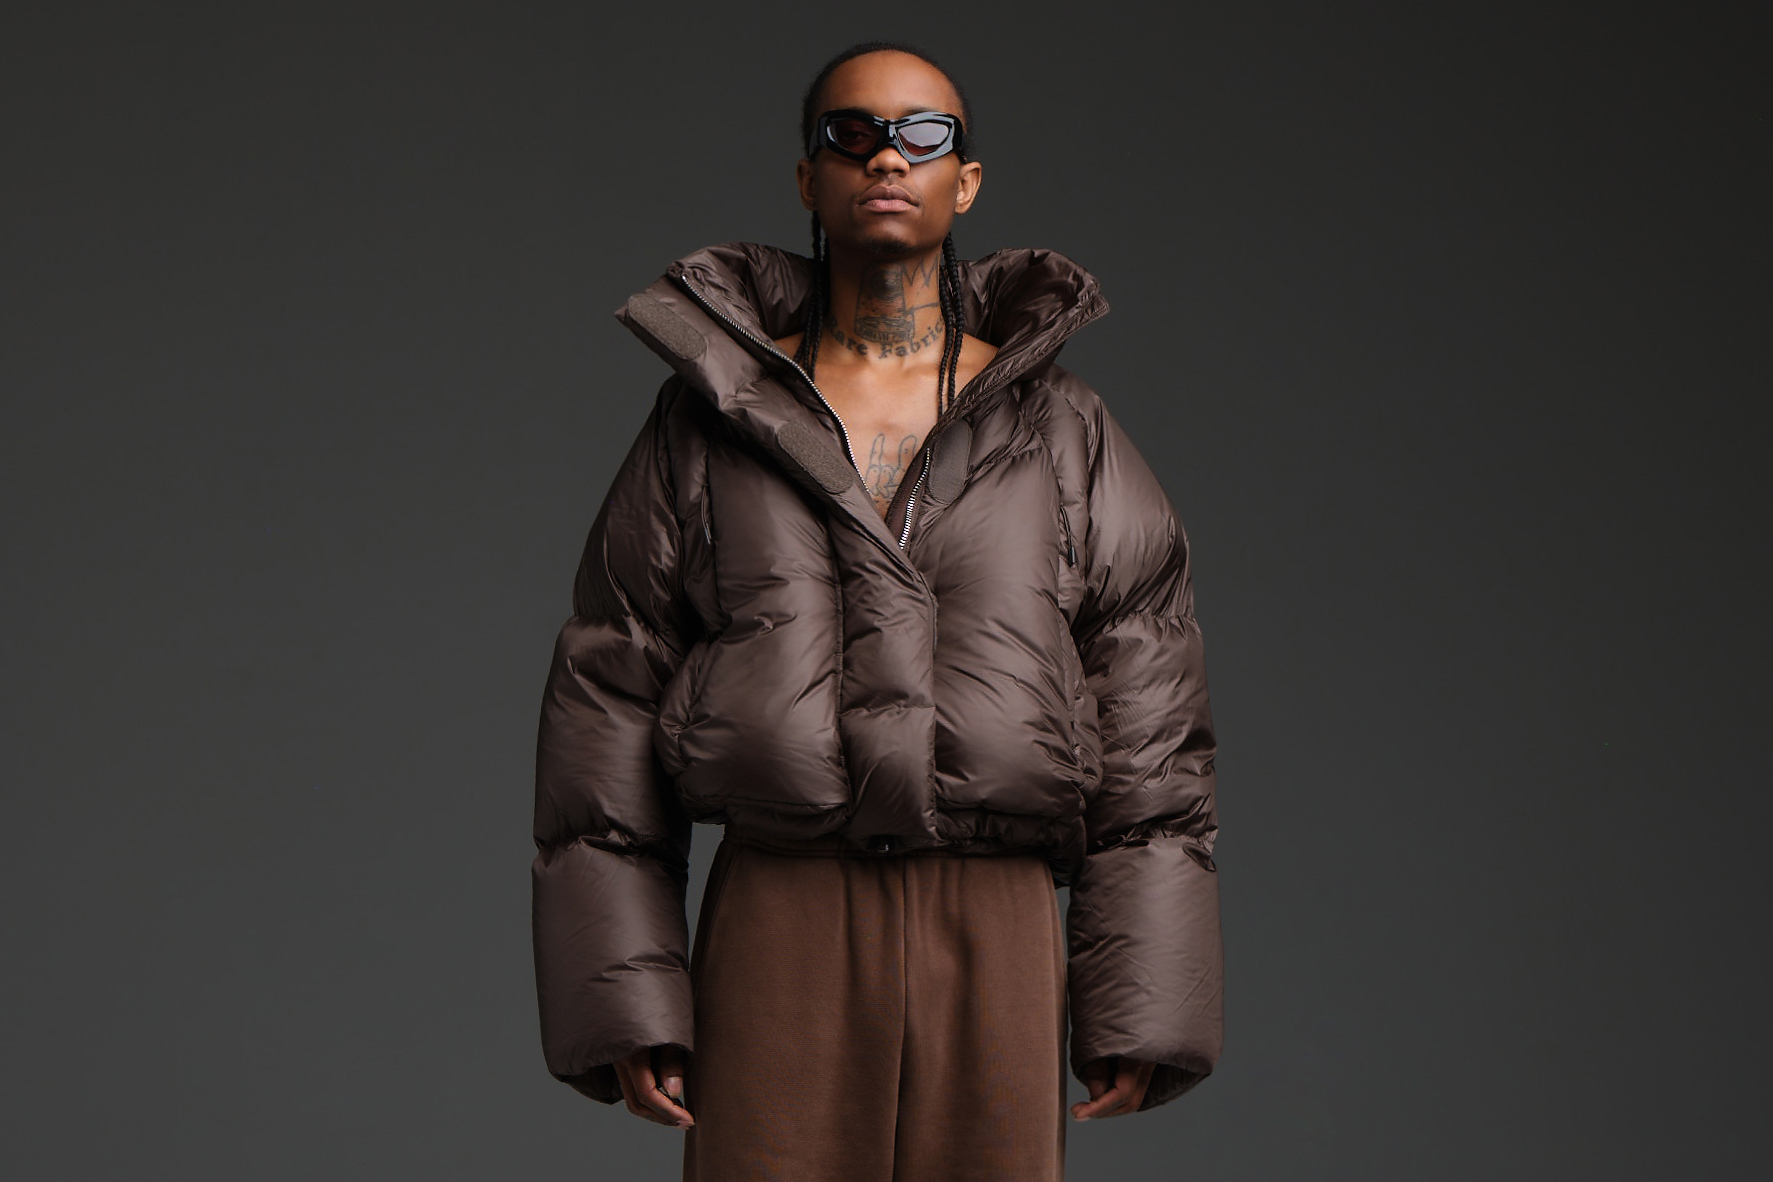 Stone Island Joins Moncler - MC Mosnar Communications